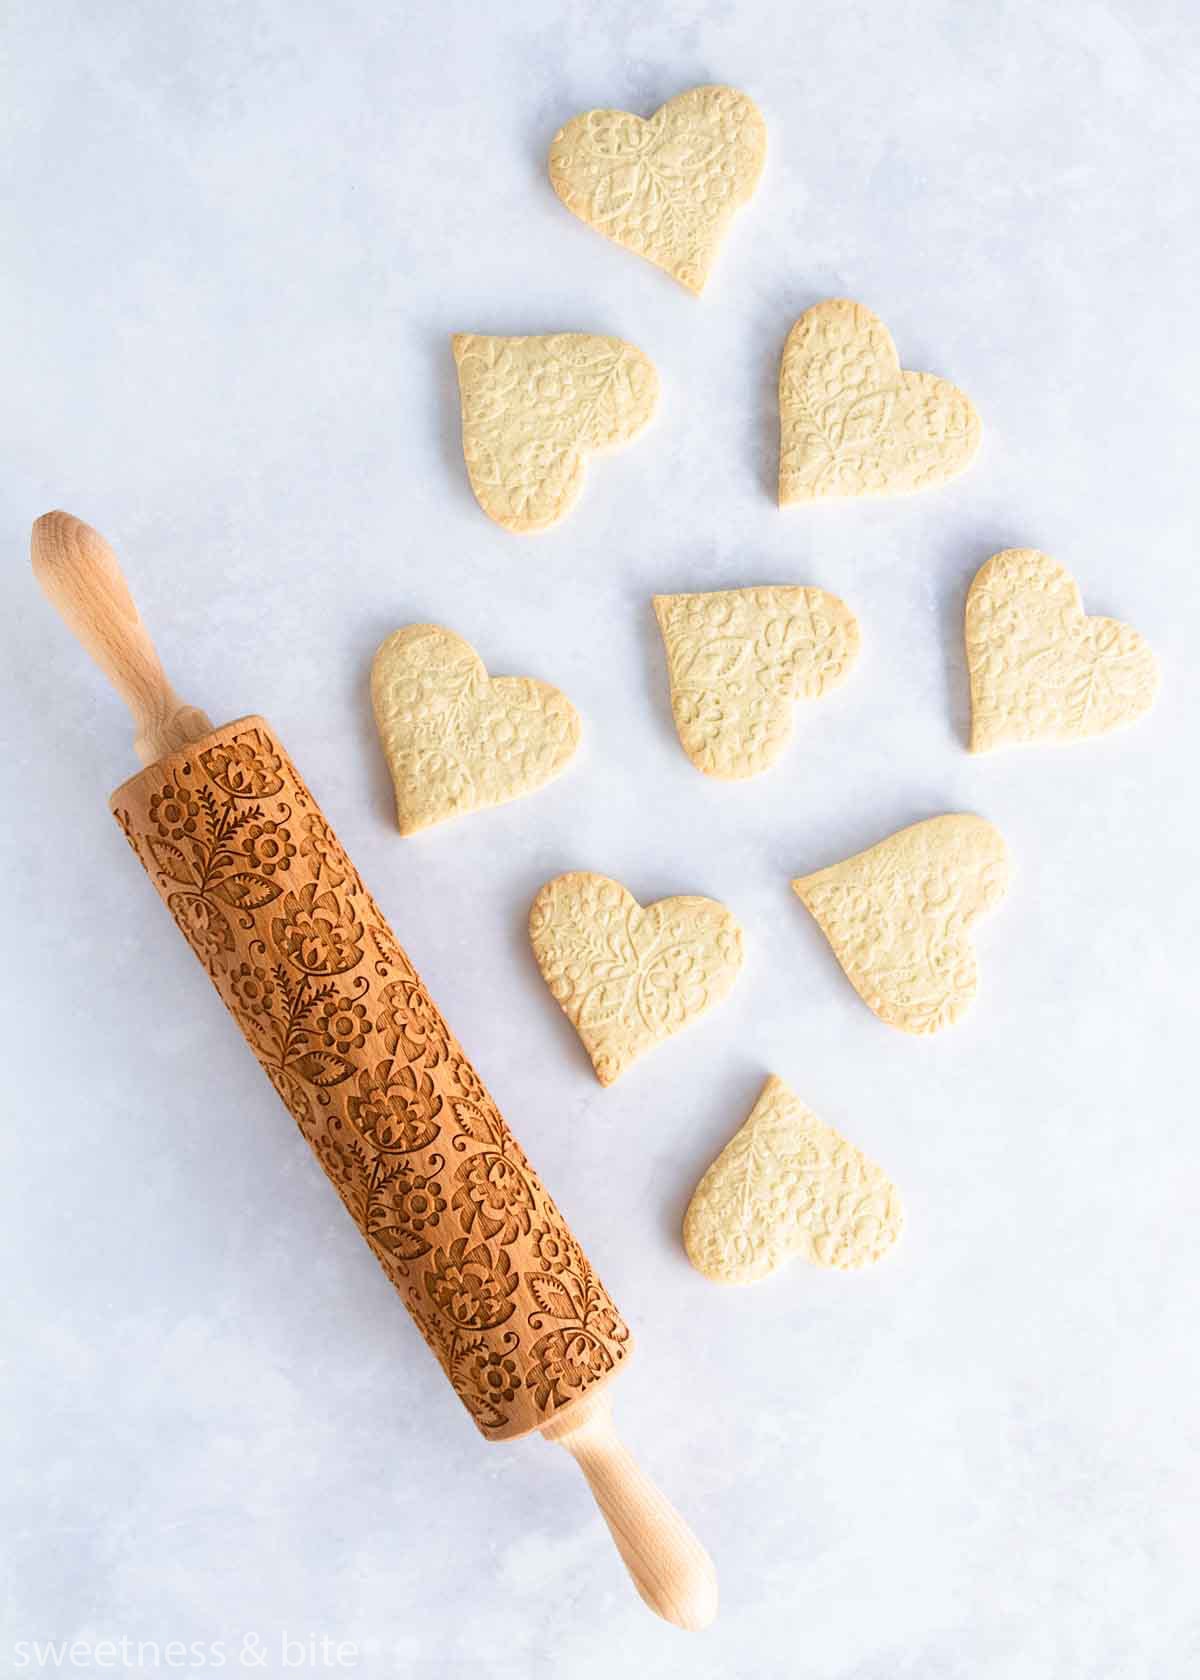 Heart shaped cookies embossed with a floral pattern, with the embossing rolling pin.